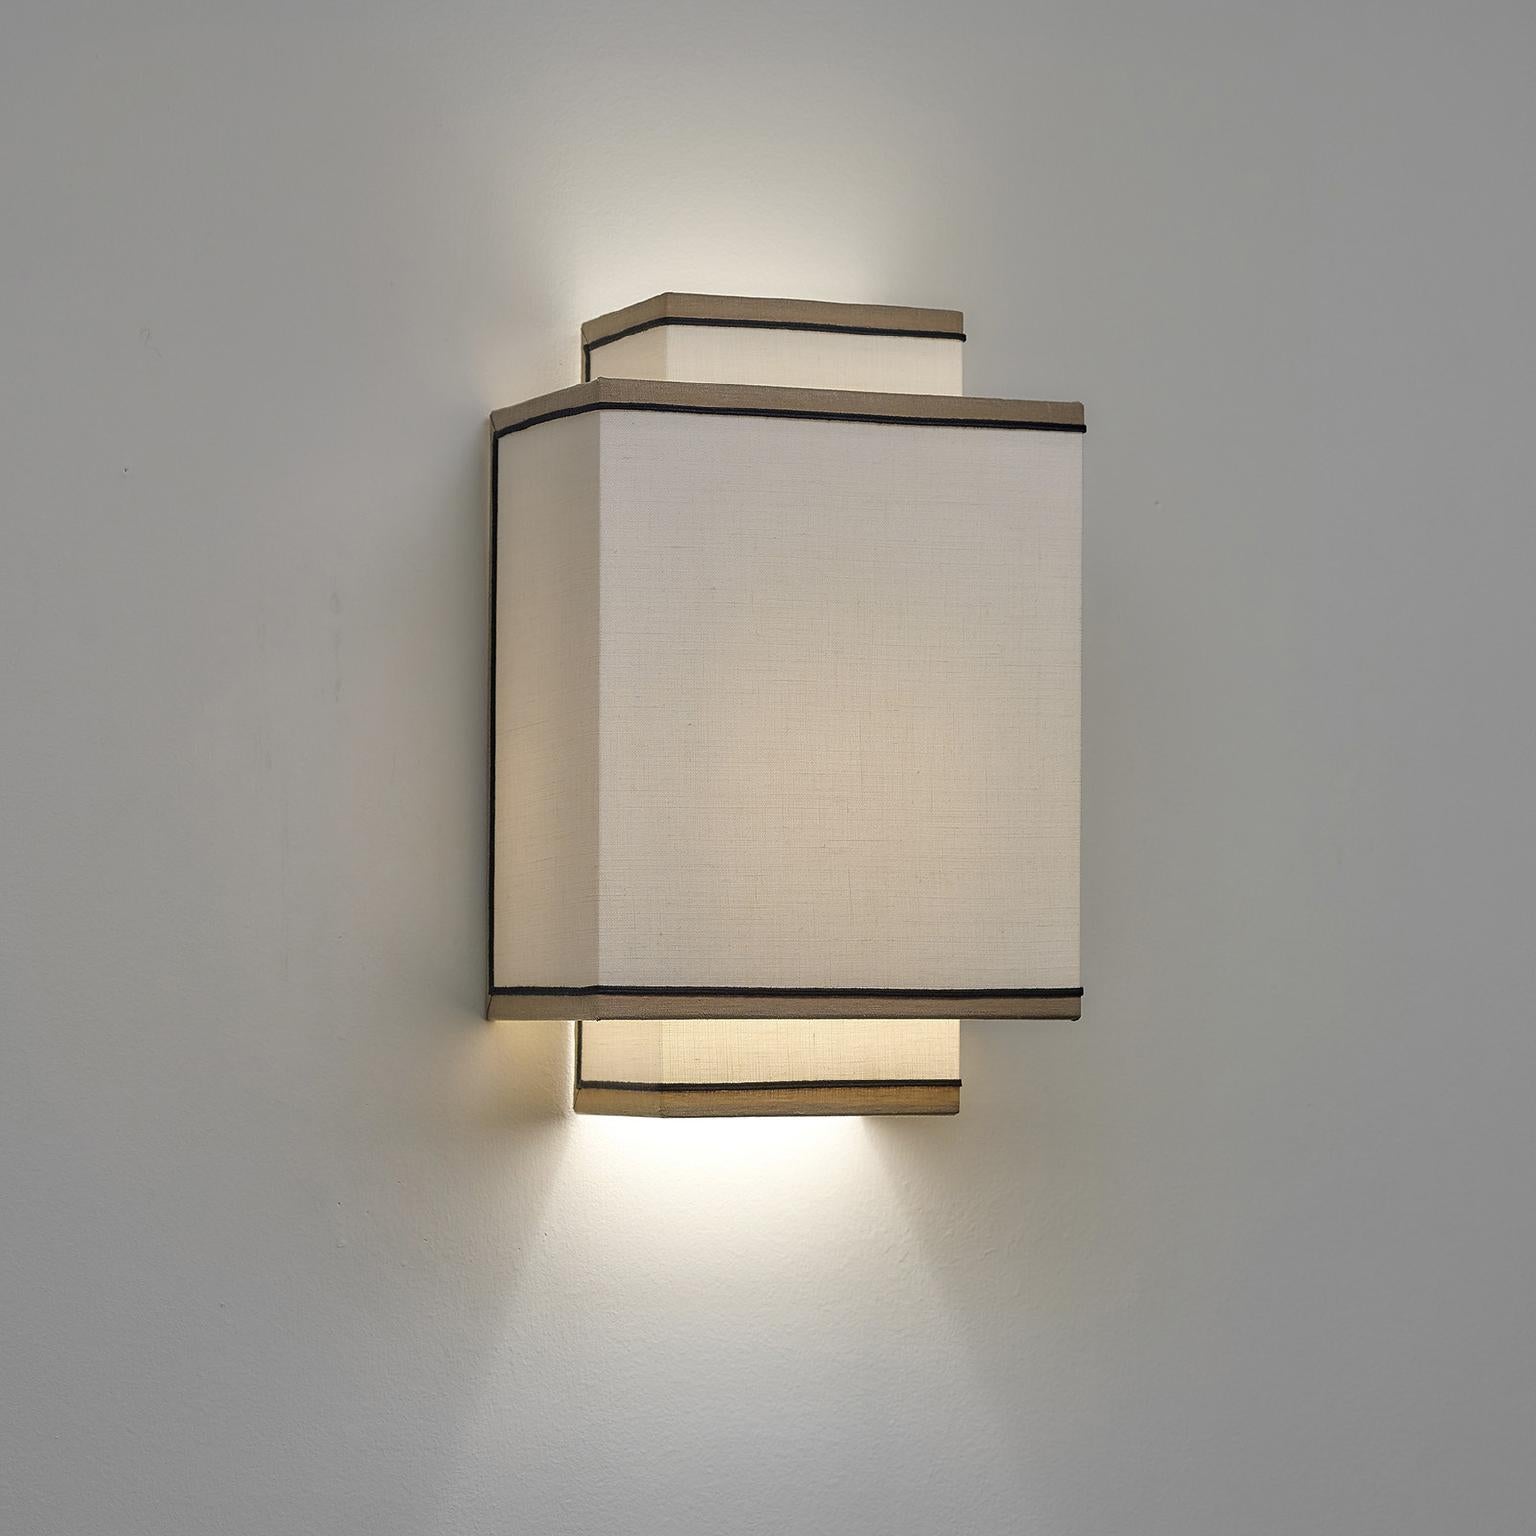 This striking wall sconce is a testament to architectural lines and elegant simplicity. This sconce is characterized by a geometric silhouette composed of two intersecting rectangles handcrafted of ivory linen with subtle taupe rim and black